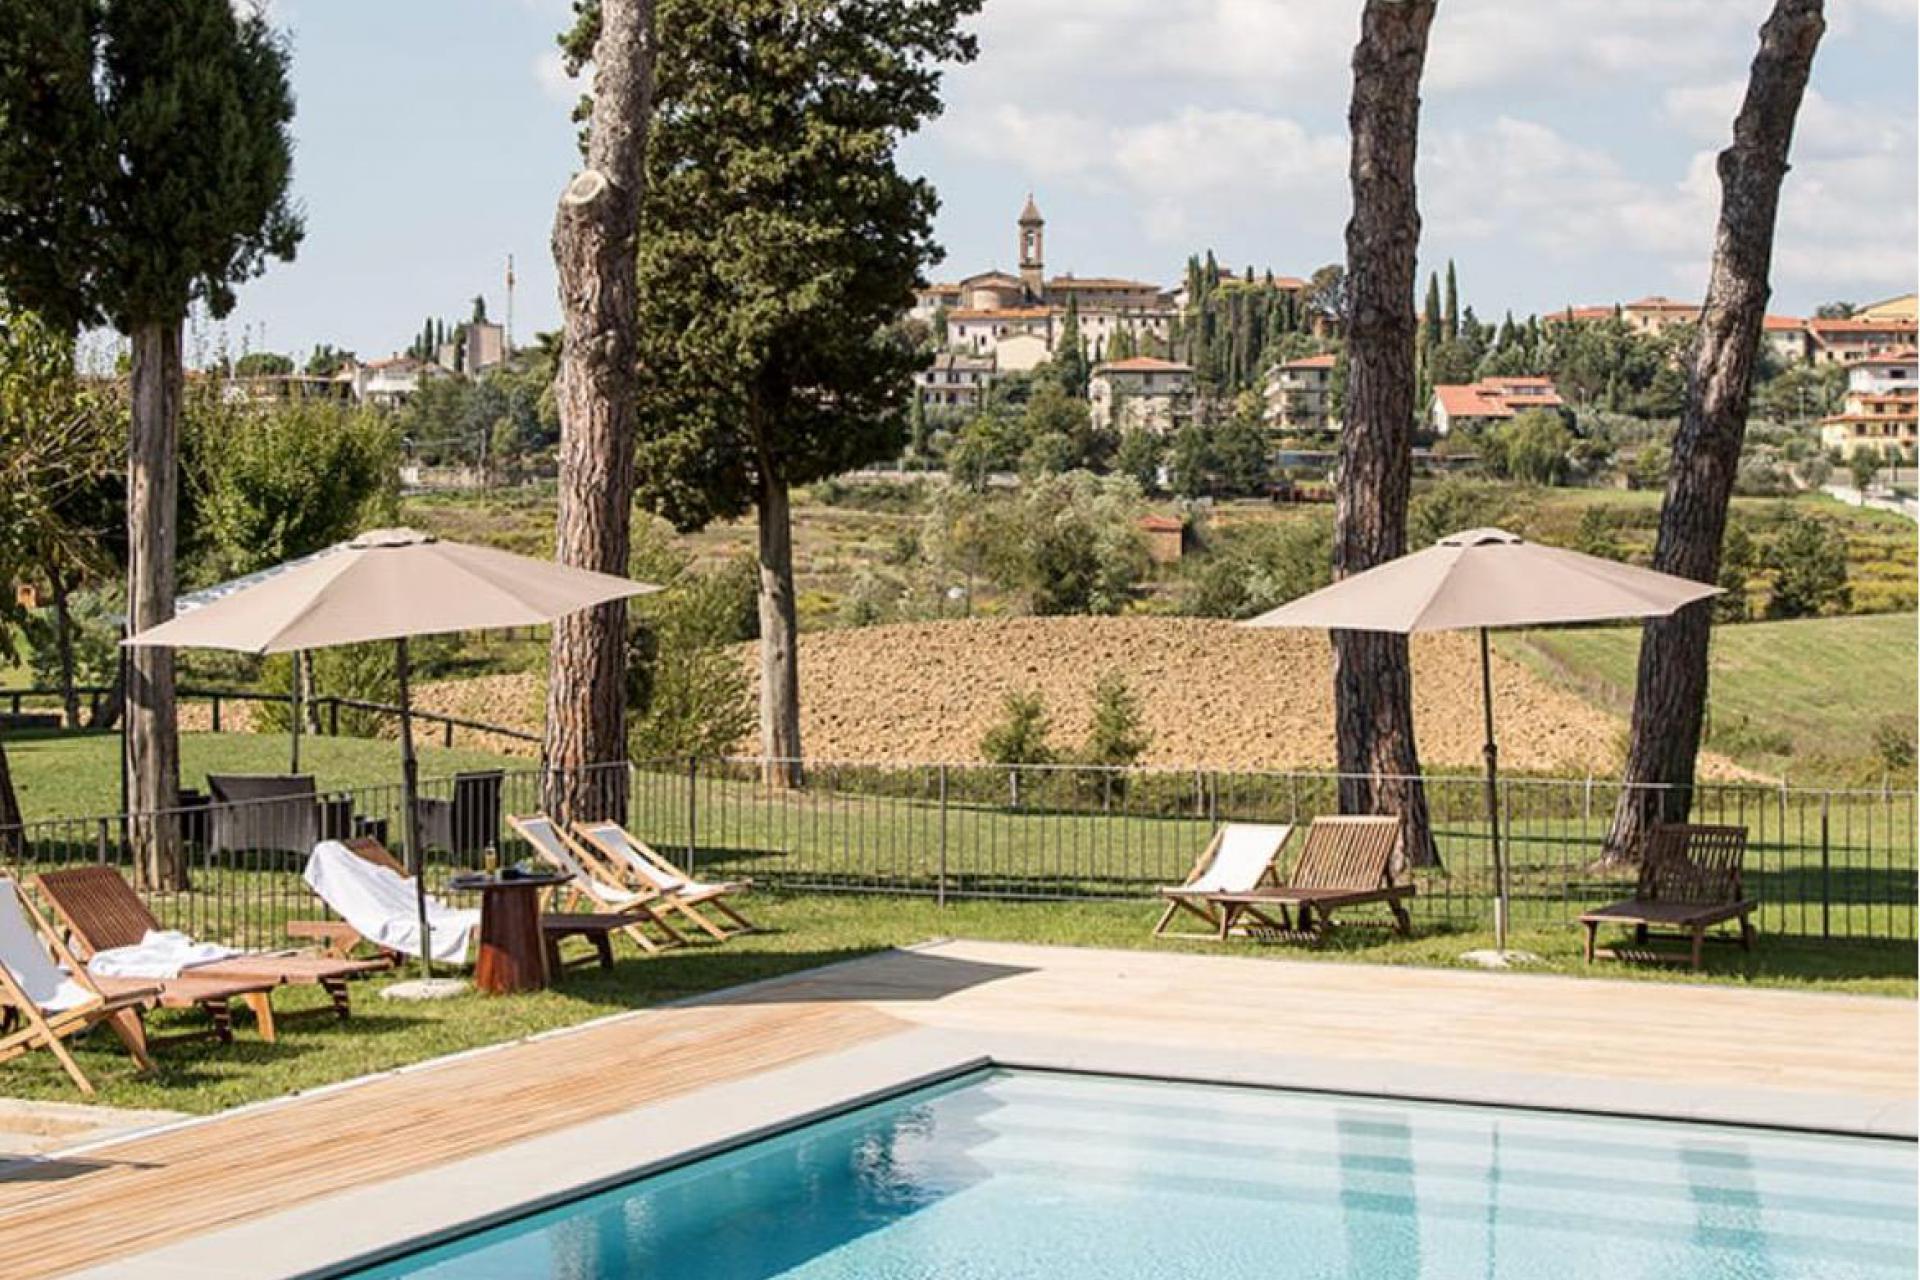 Agriturismo in Tuscany with its own restaurant